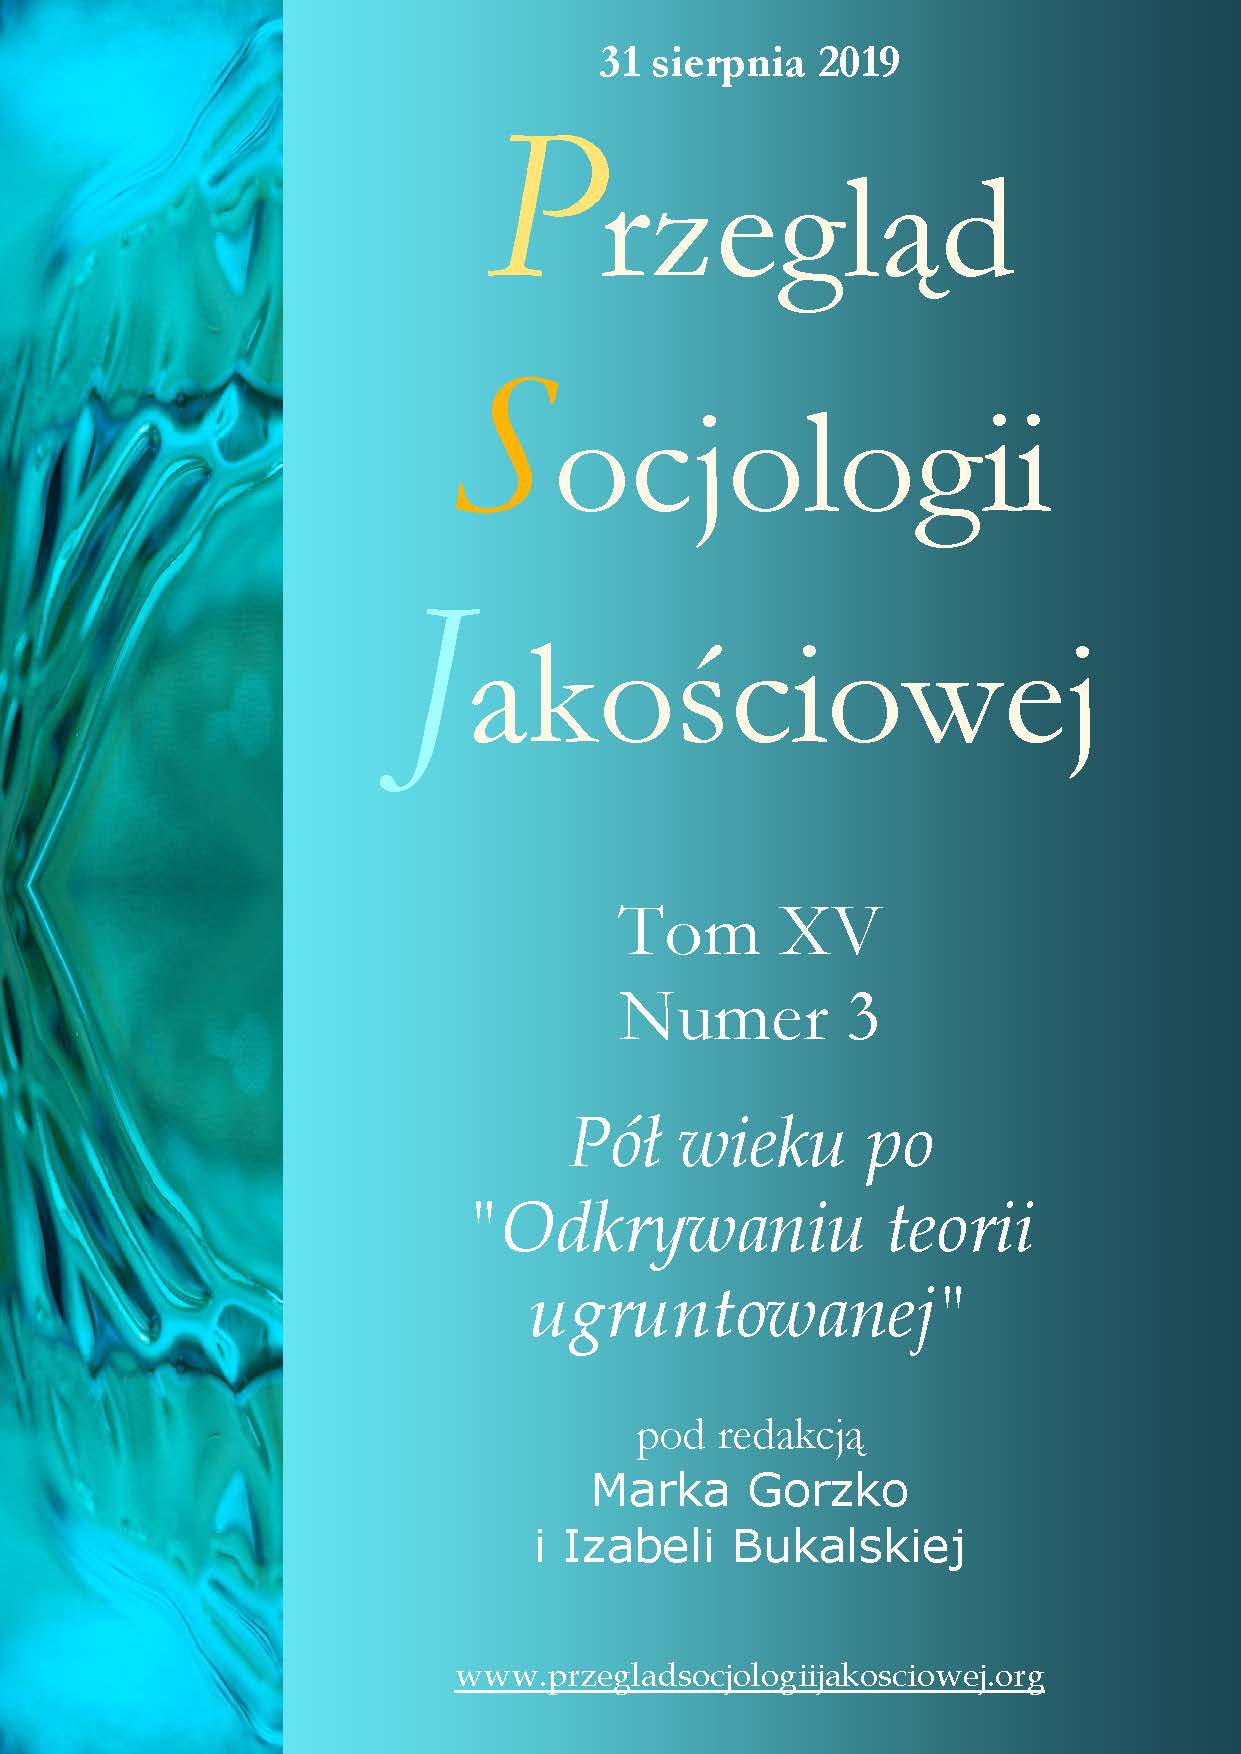 The Reception of Grounded Theory Methodology by Polish Researchers: Considerations Fifty Years after the Publication by Barney G. Glaser and Anselm L. Strauss Cover Image